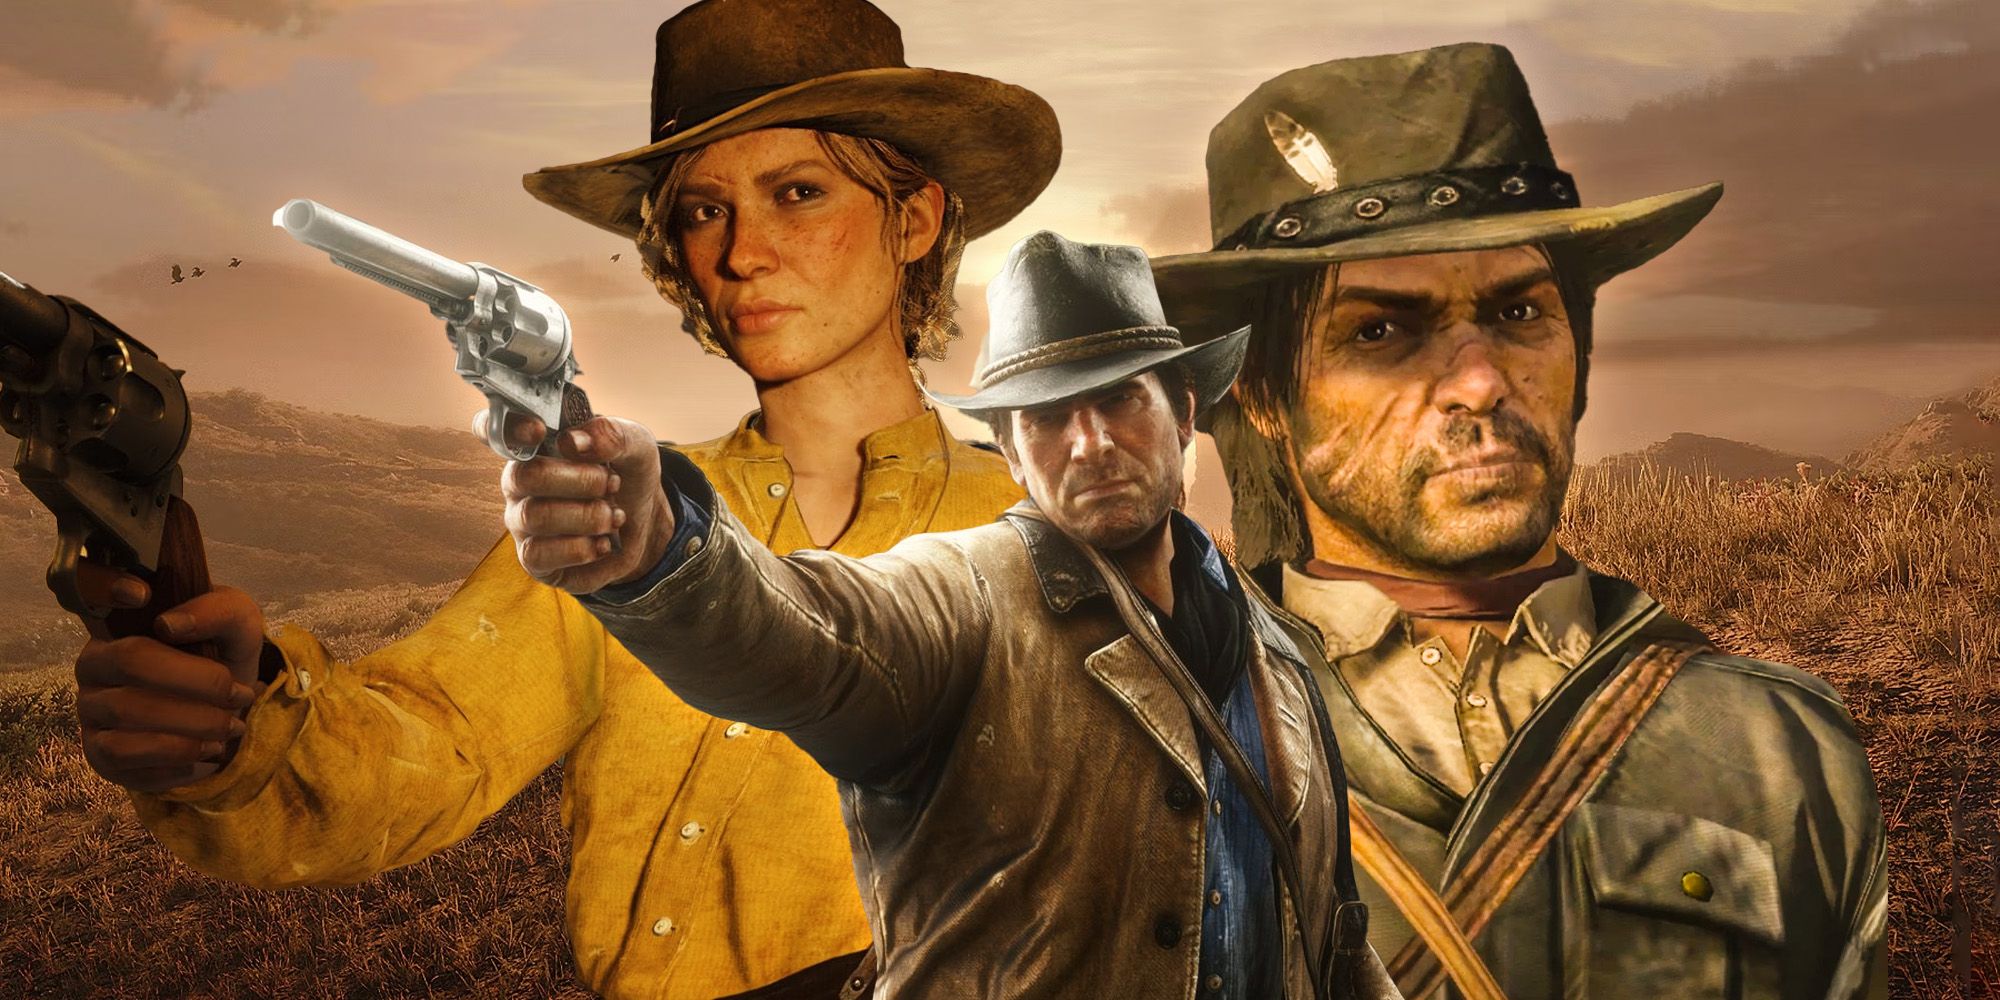 Sadie, Arthur Morgan, and James Marston from Red Dead Redemption 2